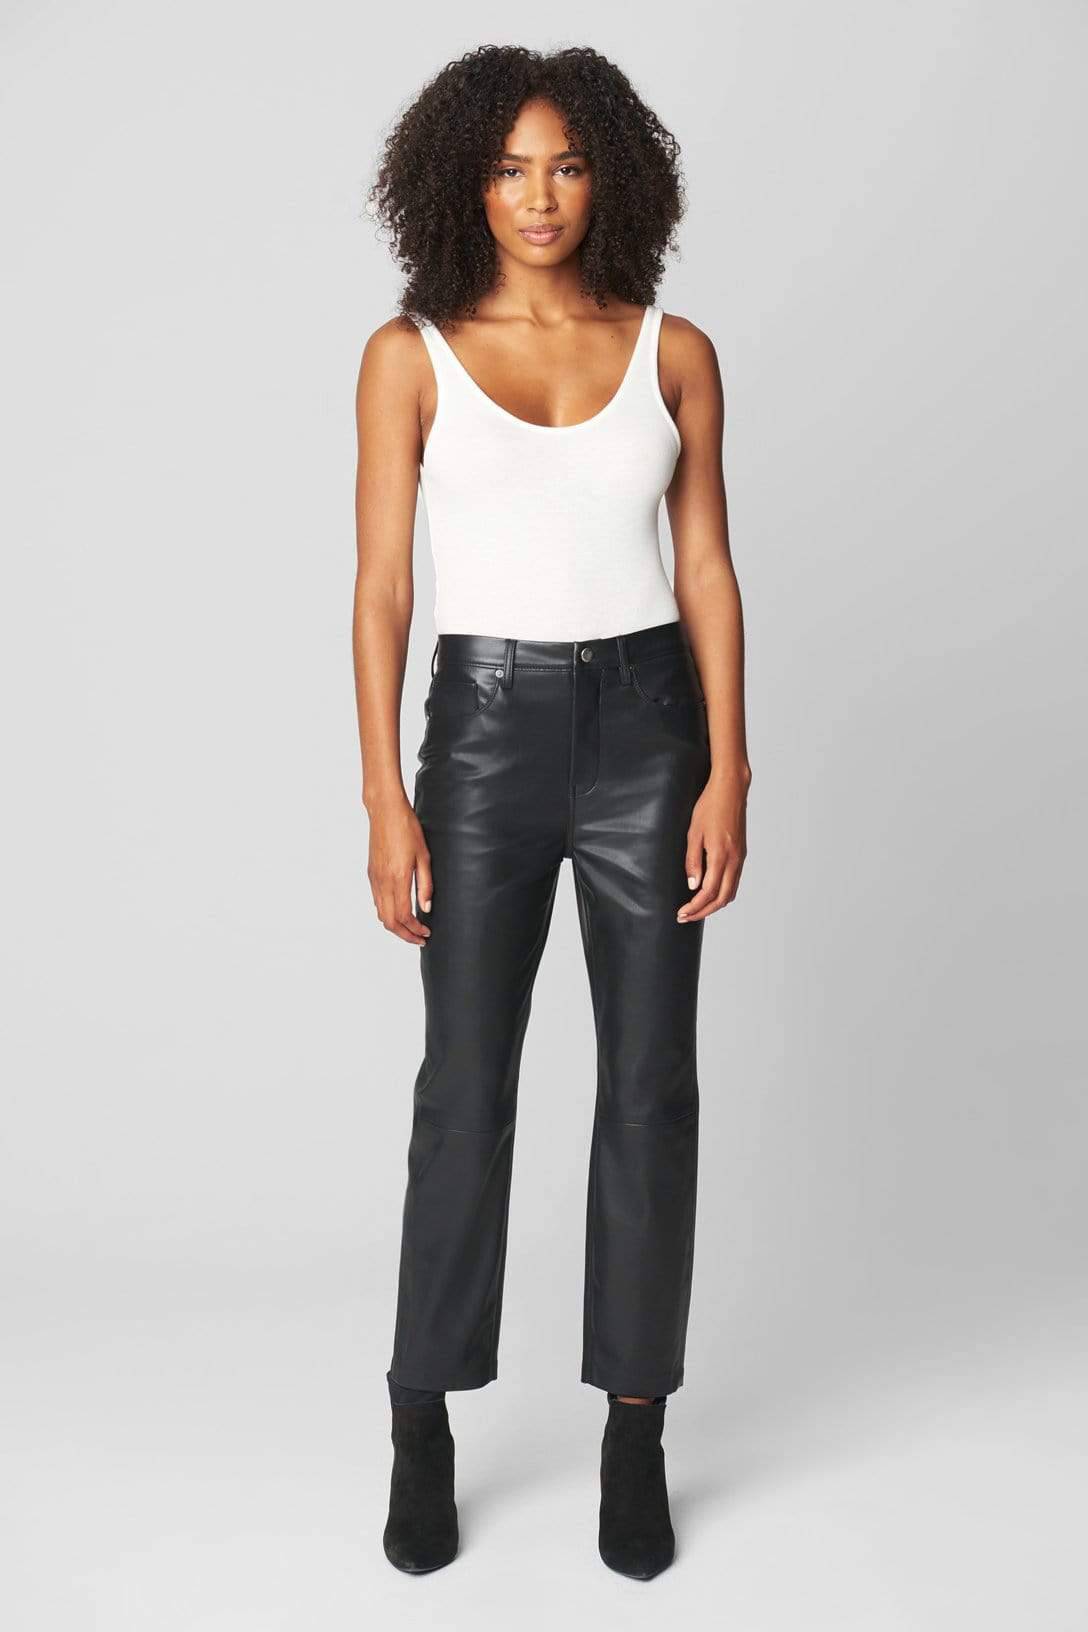 Need You Tonight Leather Pant Black, Pant Bottom by Blank NYC | LIT Boutique